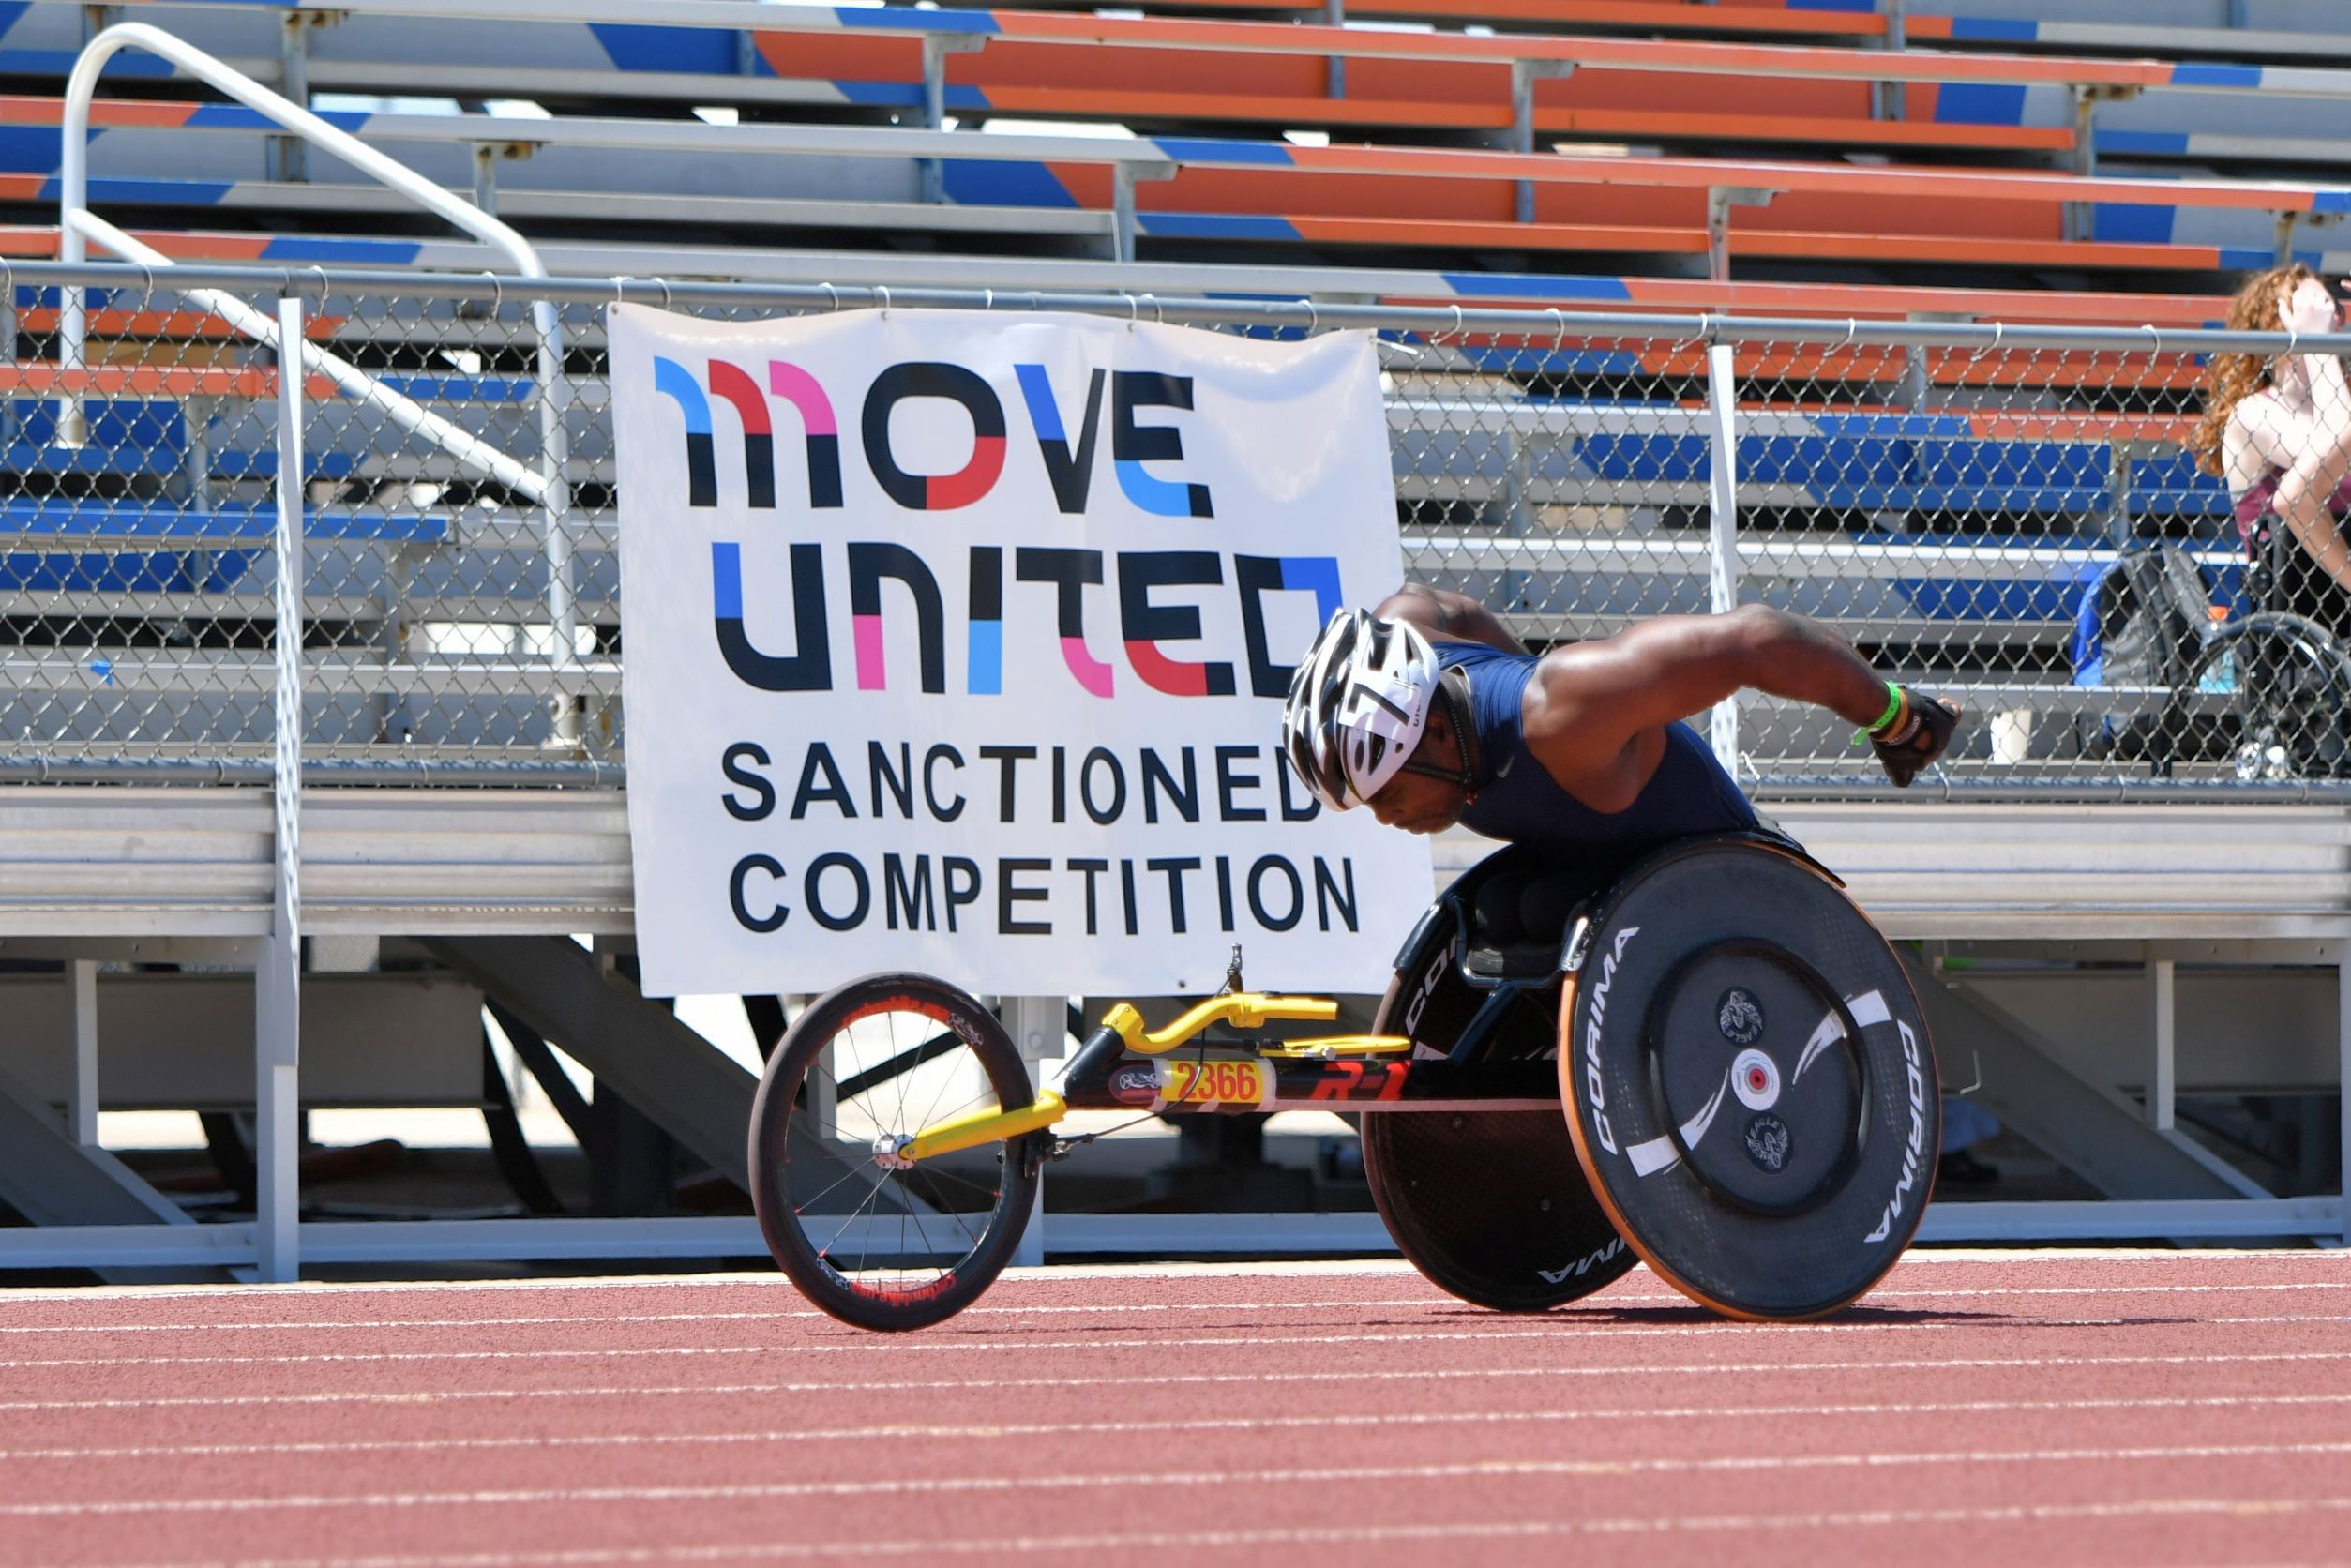 Wheelchair racer competing on the track